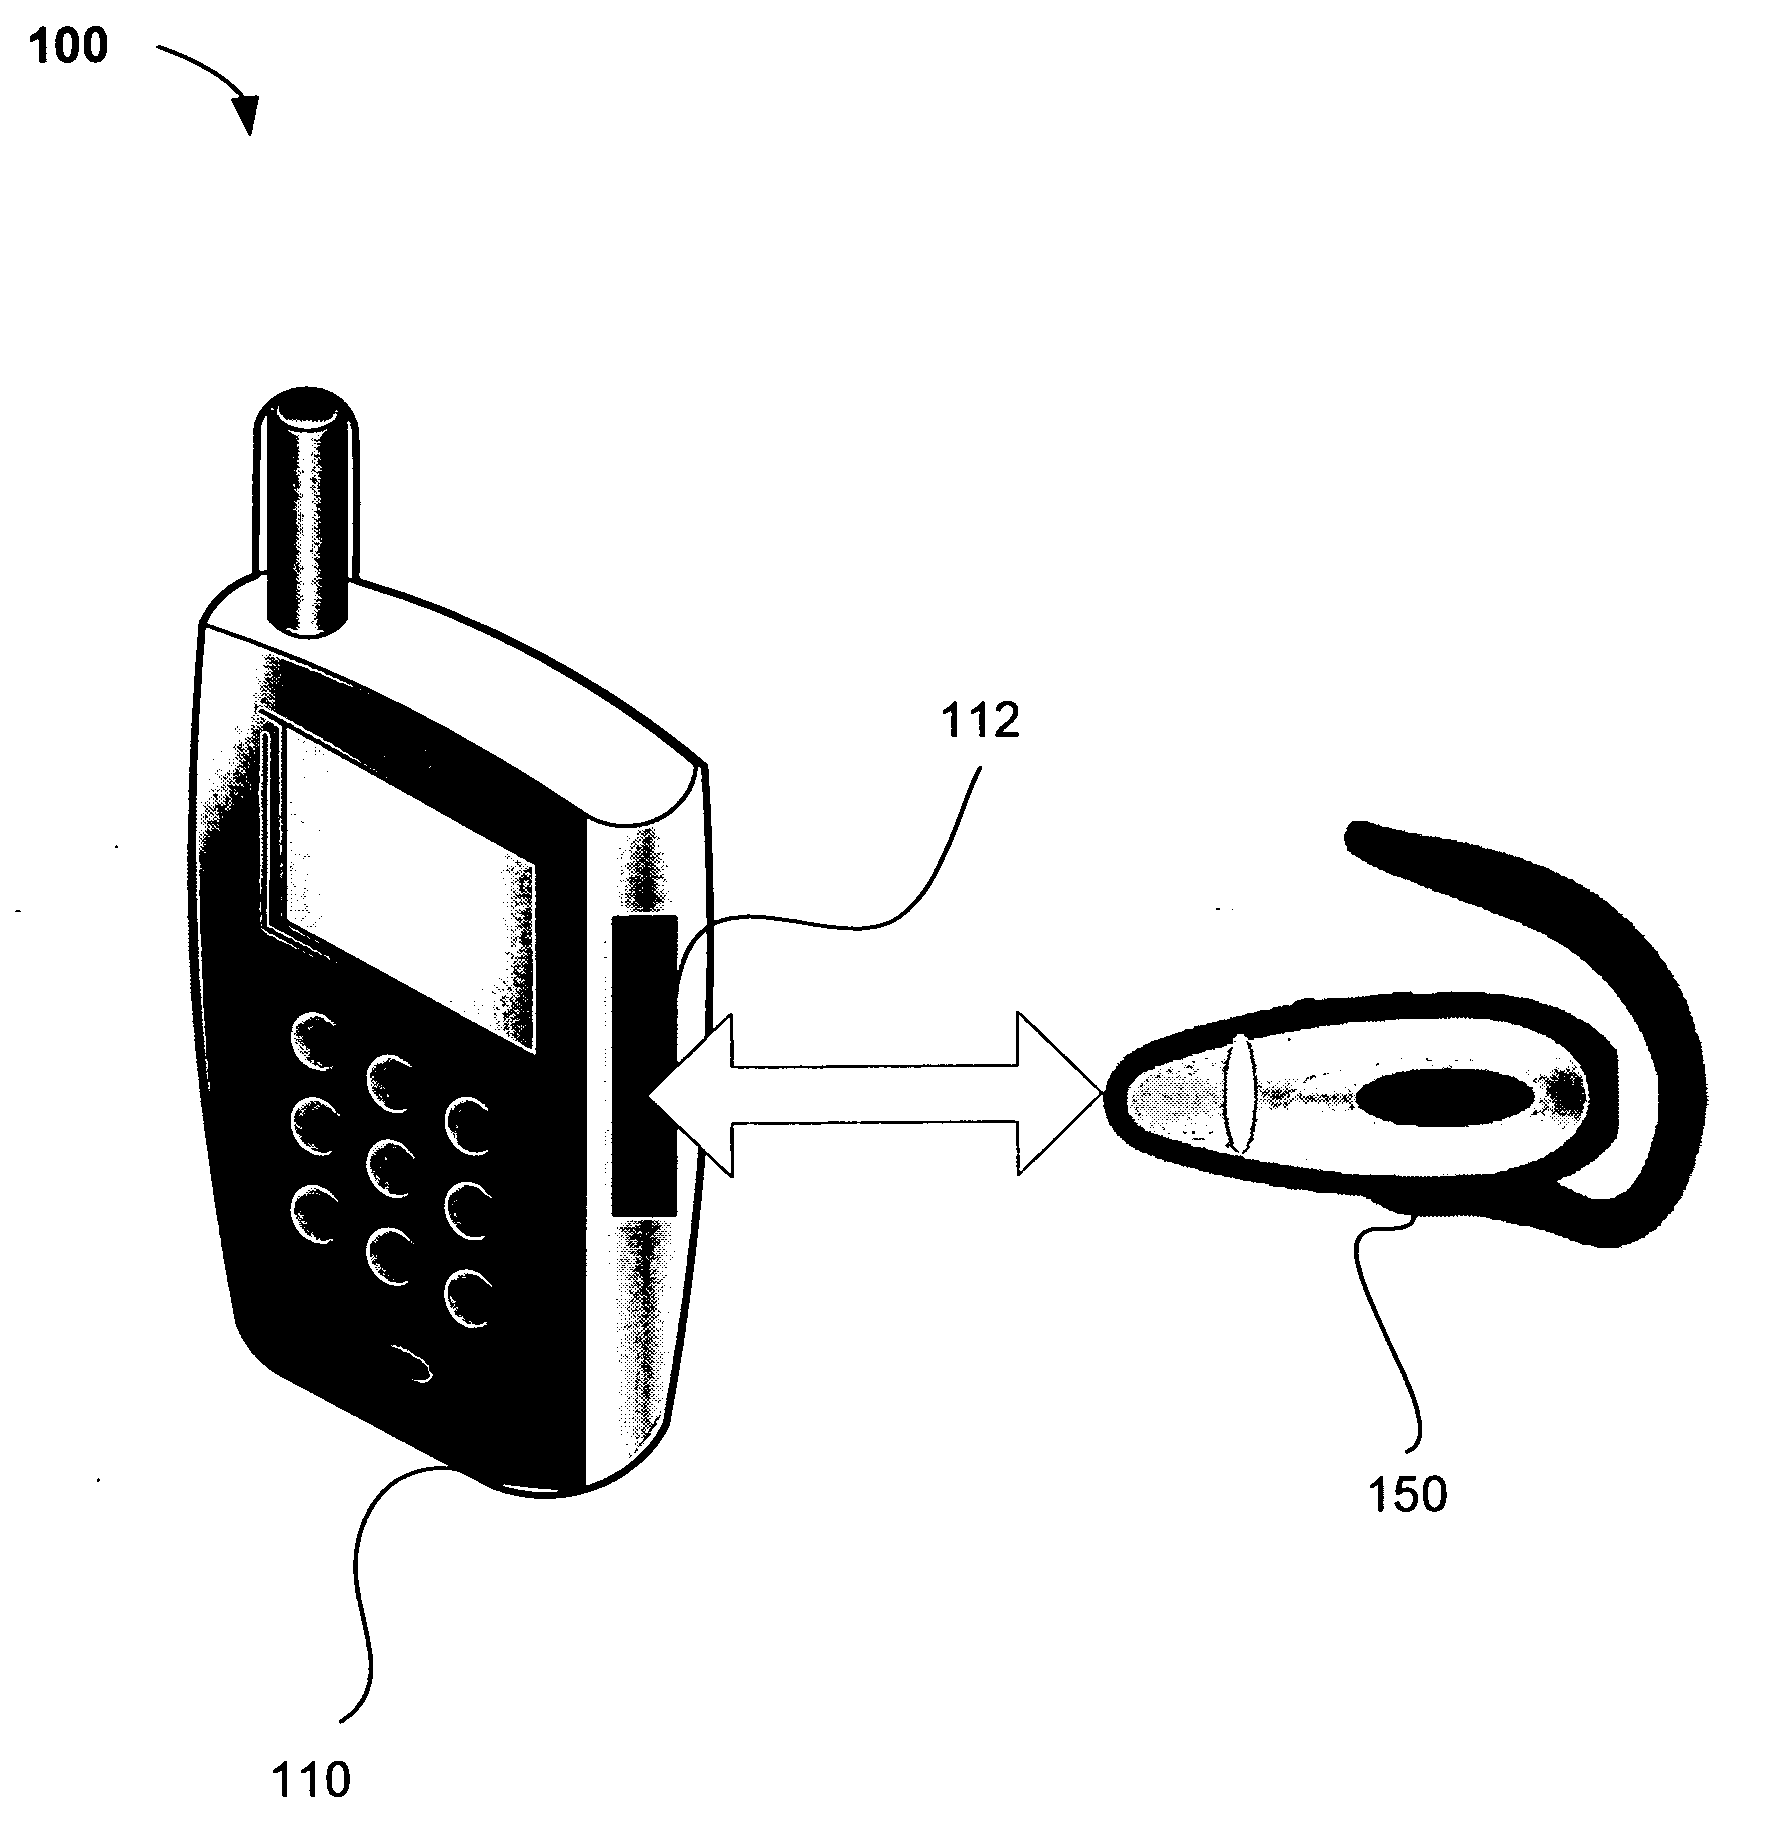 Portable communication device with detachable wireless headset